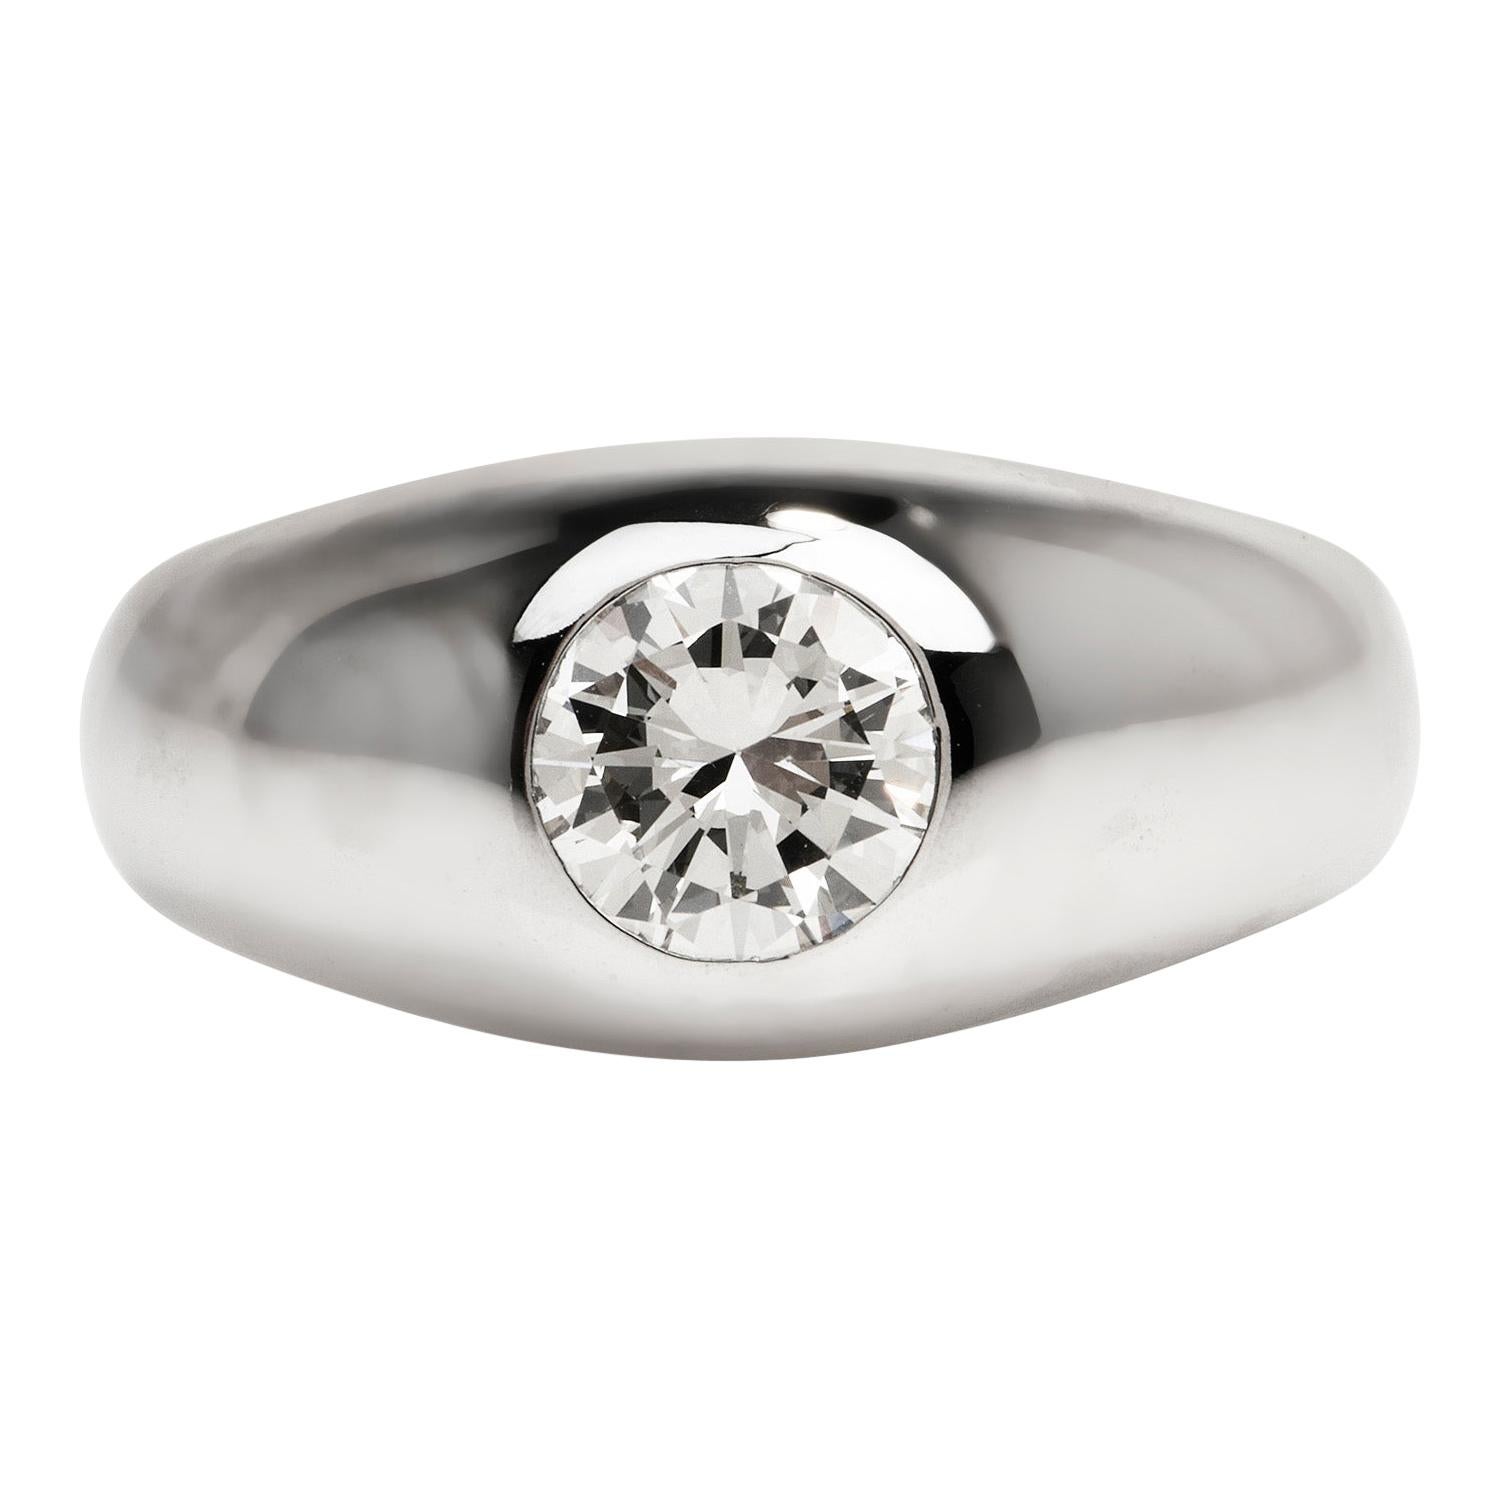 Vintage 1.15 Carats Diamond 18k White Gold Solitaire Men's Gypsy Ring ...